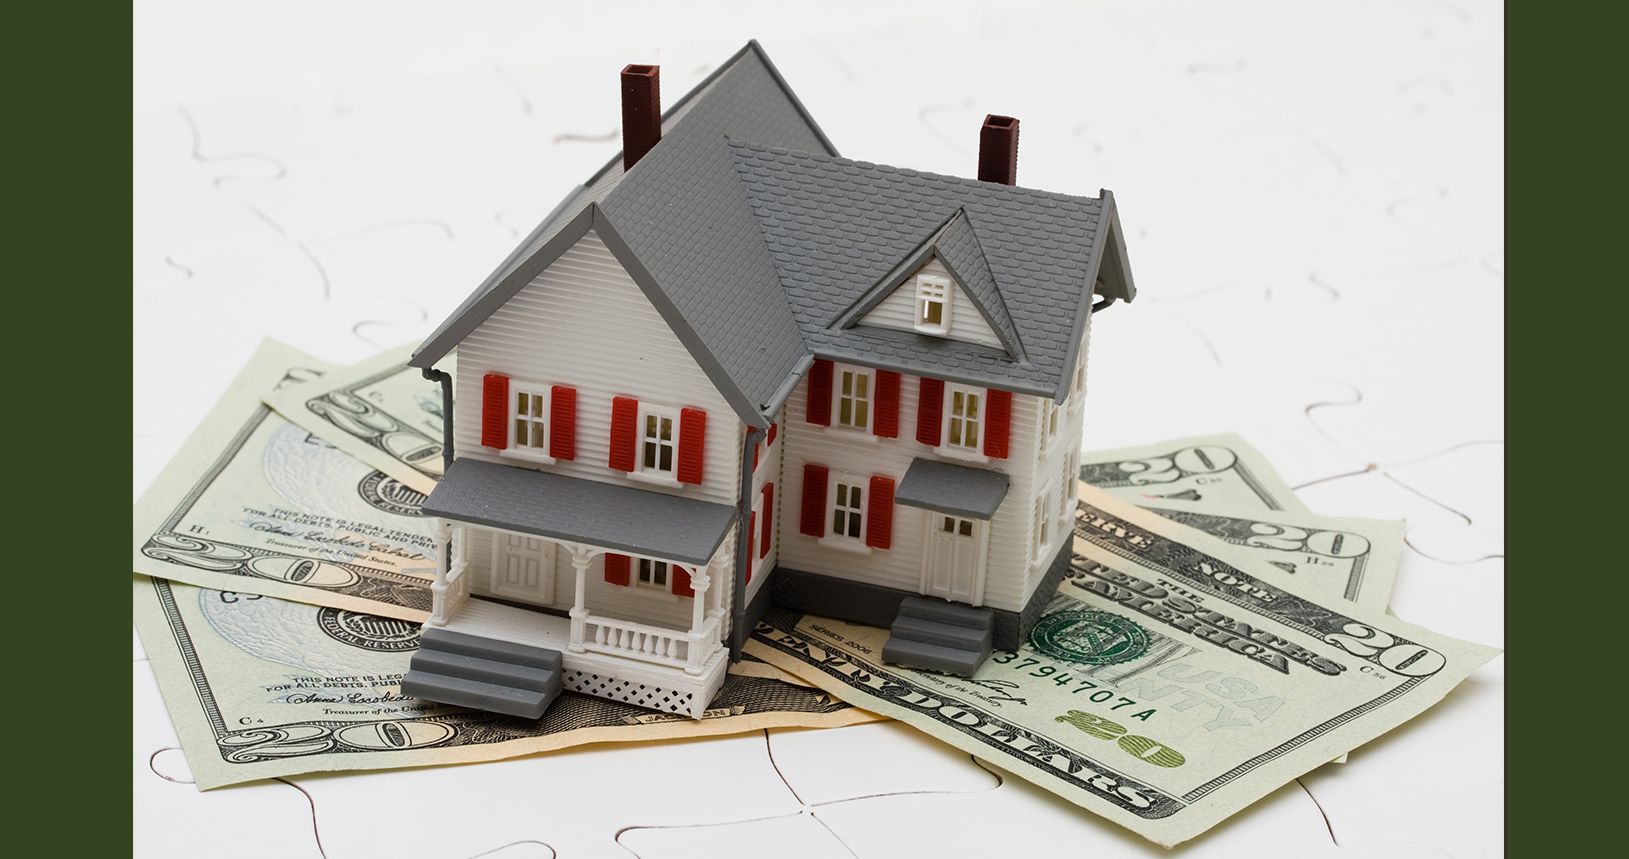 If You Are A Wyoming Homeowner, You May Qualify For A Partial Property Tax Refund